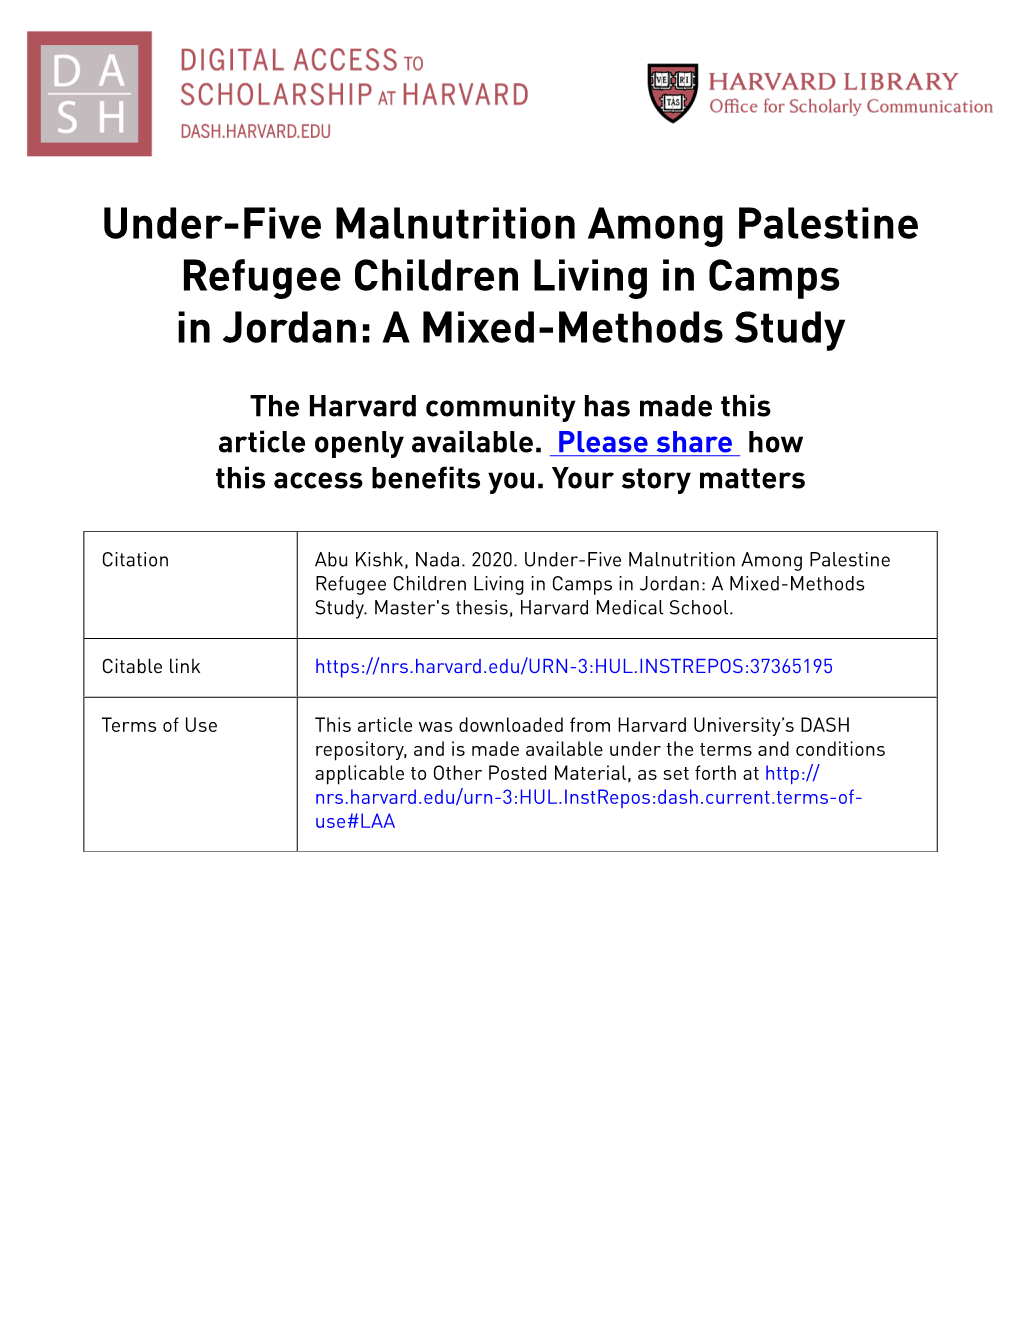 Under-Five Malnutrition Among Palestine Refugee Children Living in Camps in Jordan: a Mixed-Methods Study